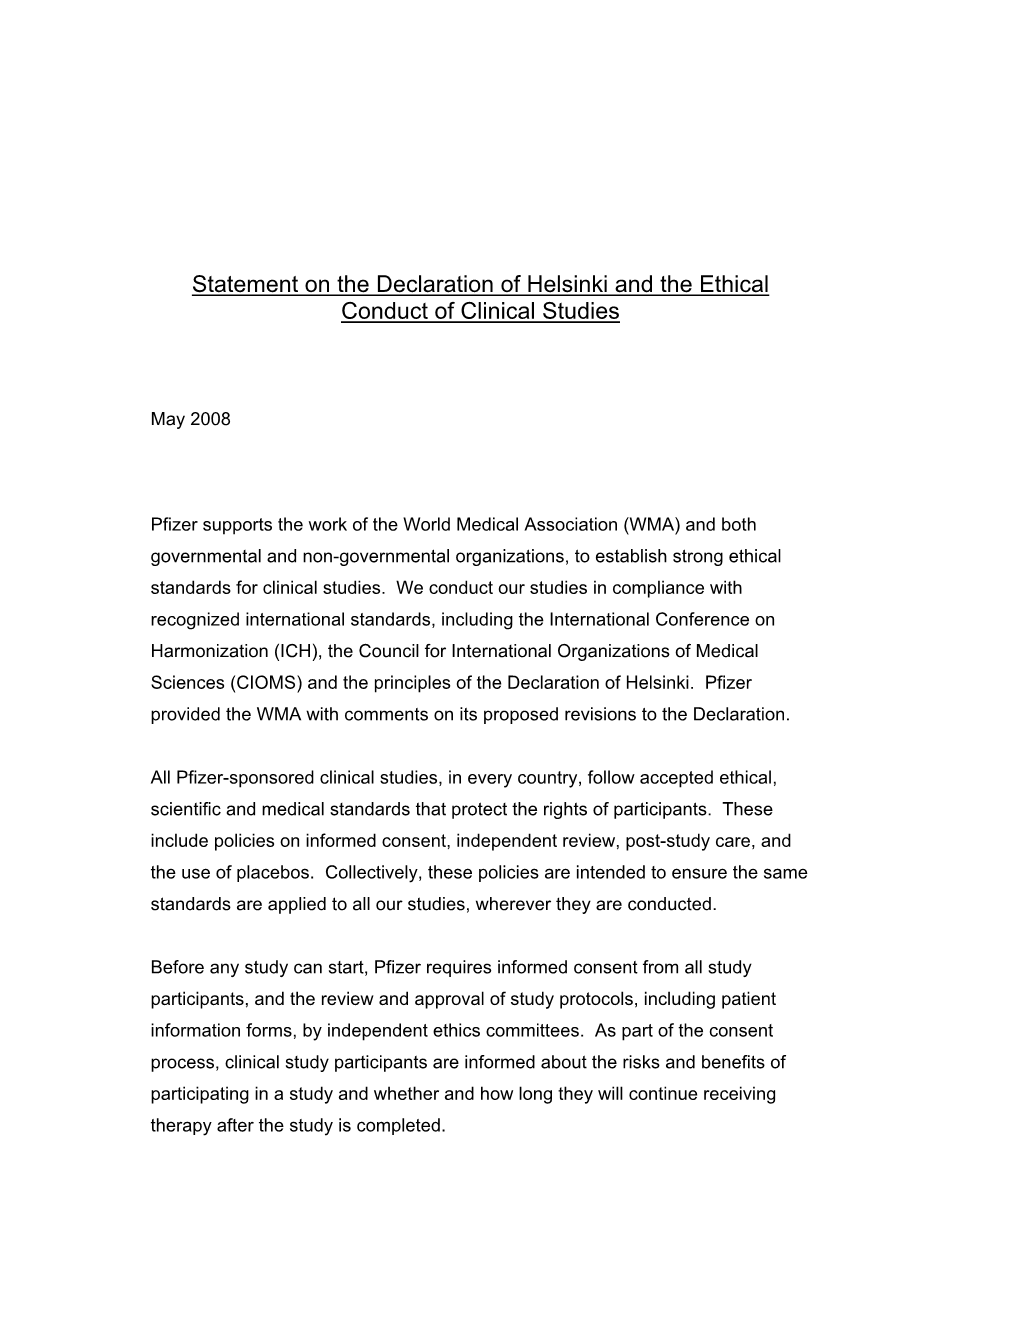 Statement on the Declaration of Helsinki and the Ethical Conduct of Clinical Studies